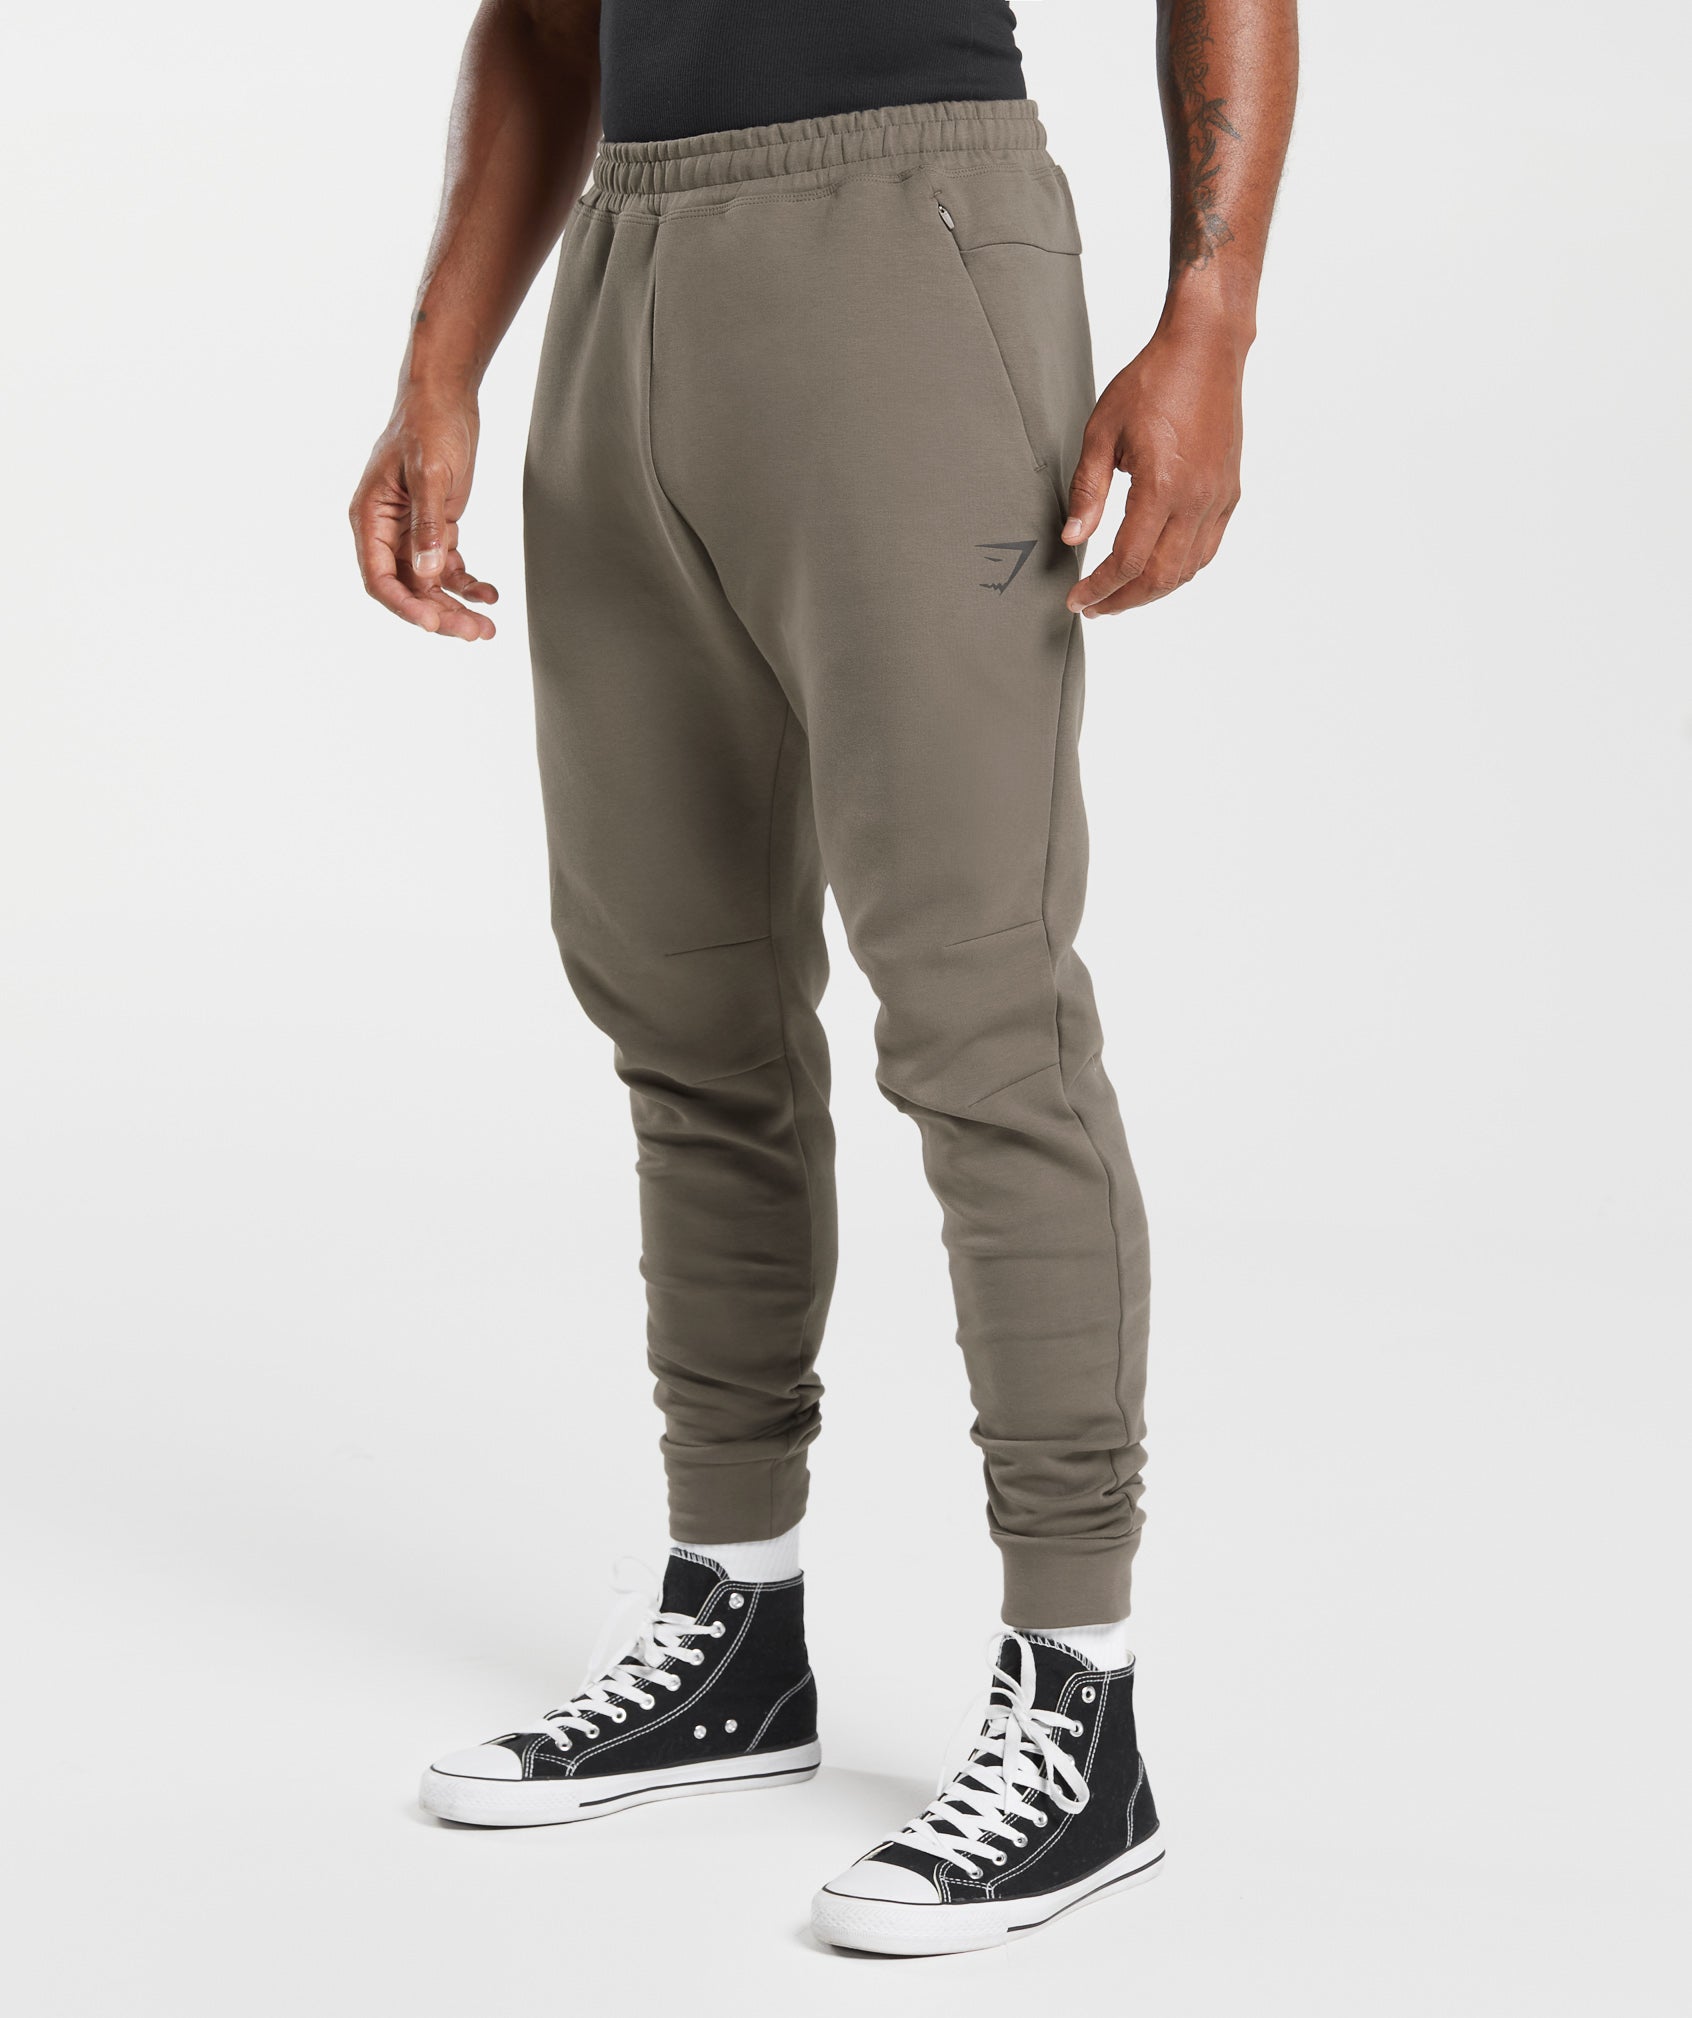 Rest Day Knit Joggers in Camo Brown - view 3